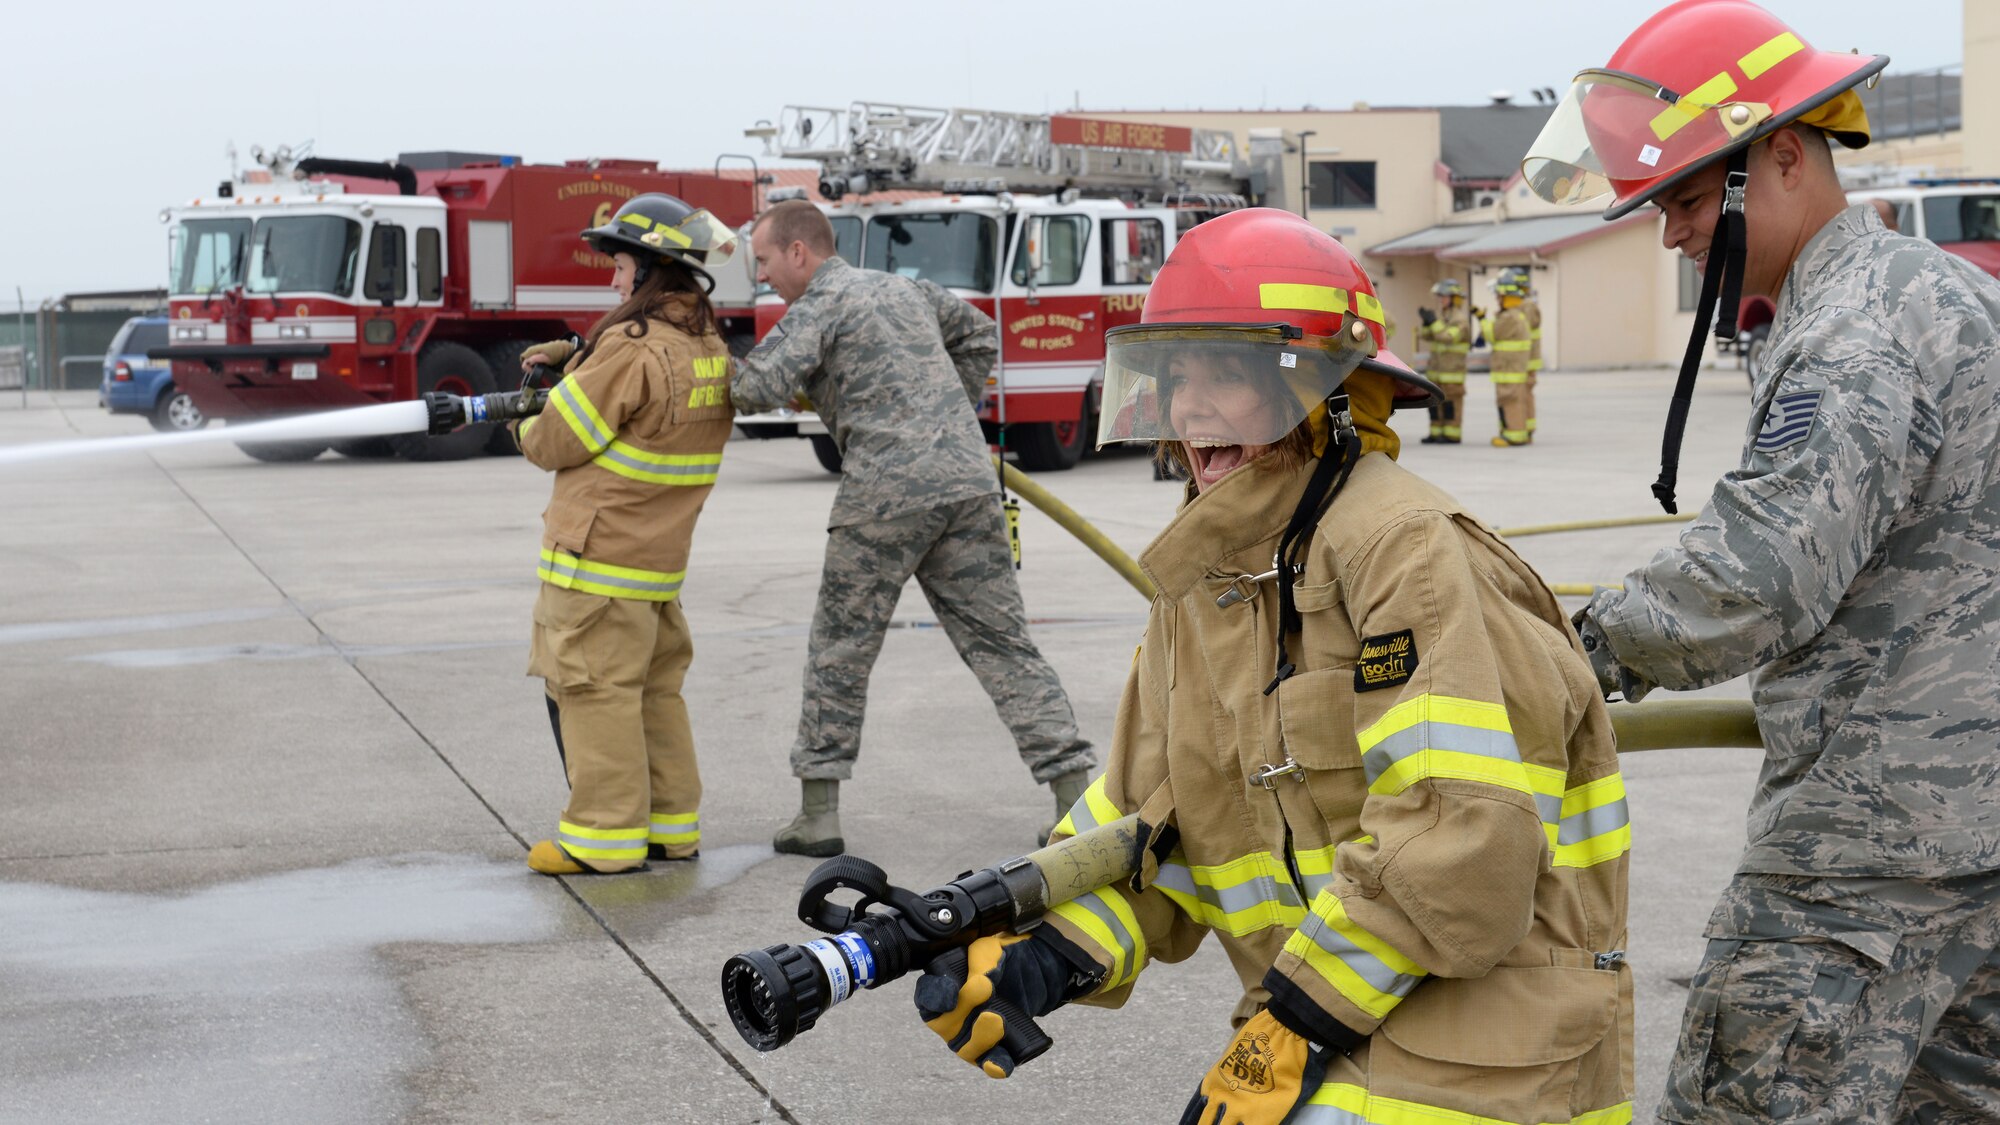 Airmen from the 31st Civil Engineer Squadron fire management flight help spouses use water hoses during the first wing-led Spouses Appreciation Day tour, May 10, 2016, at Aviano Air Base, Italy. Spouses participated in hands-on activities to better understand the 31st Fighter Wing’s mission. (U.S. Air Force photo by Airman 1st Class Cary Smith/Released)